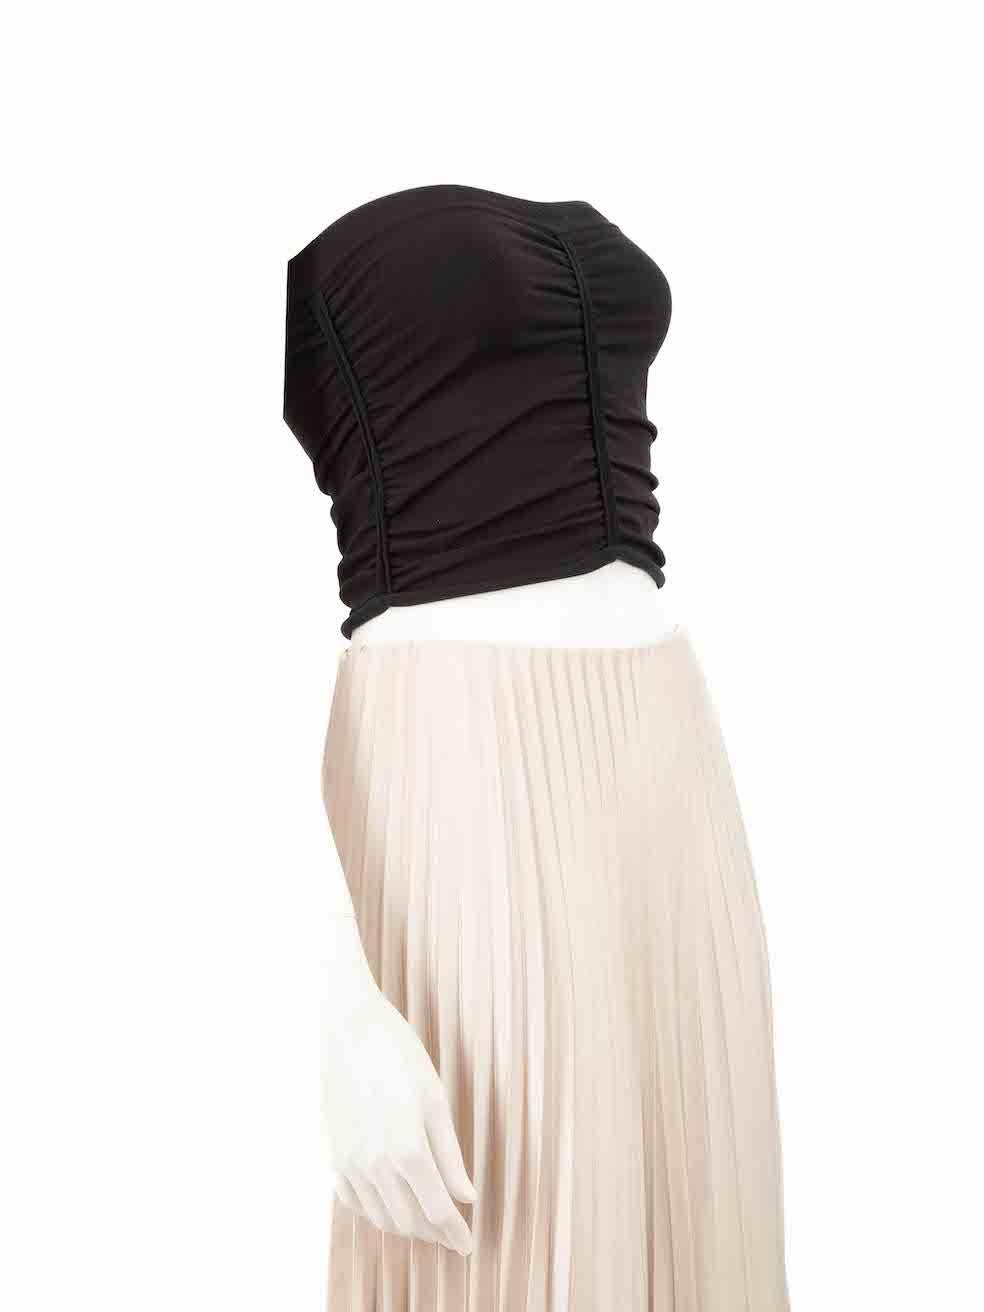 CONDITION is Never worn. No visible wear to crop top is evident. However, size label and composition label have been removed on this new Alexander Wang designer resale item.
 
 
 
 Details
 
 
 Black
 
 Synthetic
 
 Tube top
 
 Sleeveless and